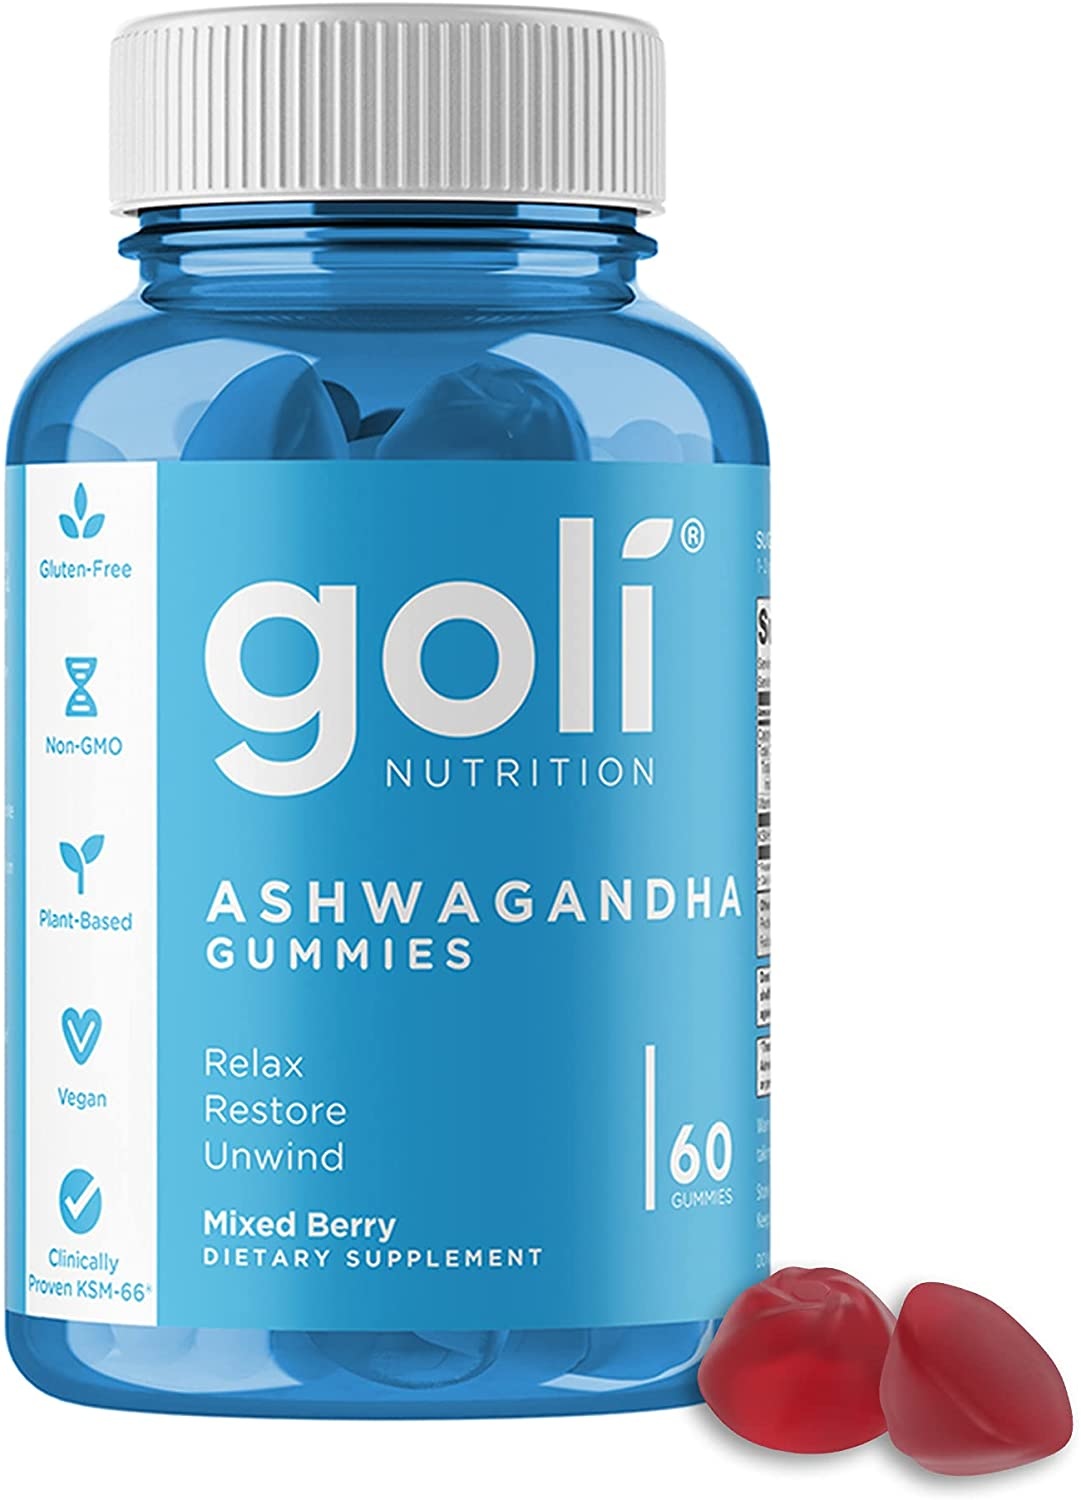 Goli Nutrition Ashwagandha Gummies, Mixed Berry Flavor, 60 Count, Stress Supplement - image 1 of 8